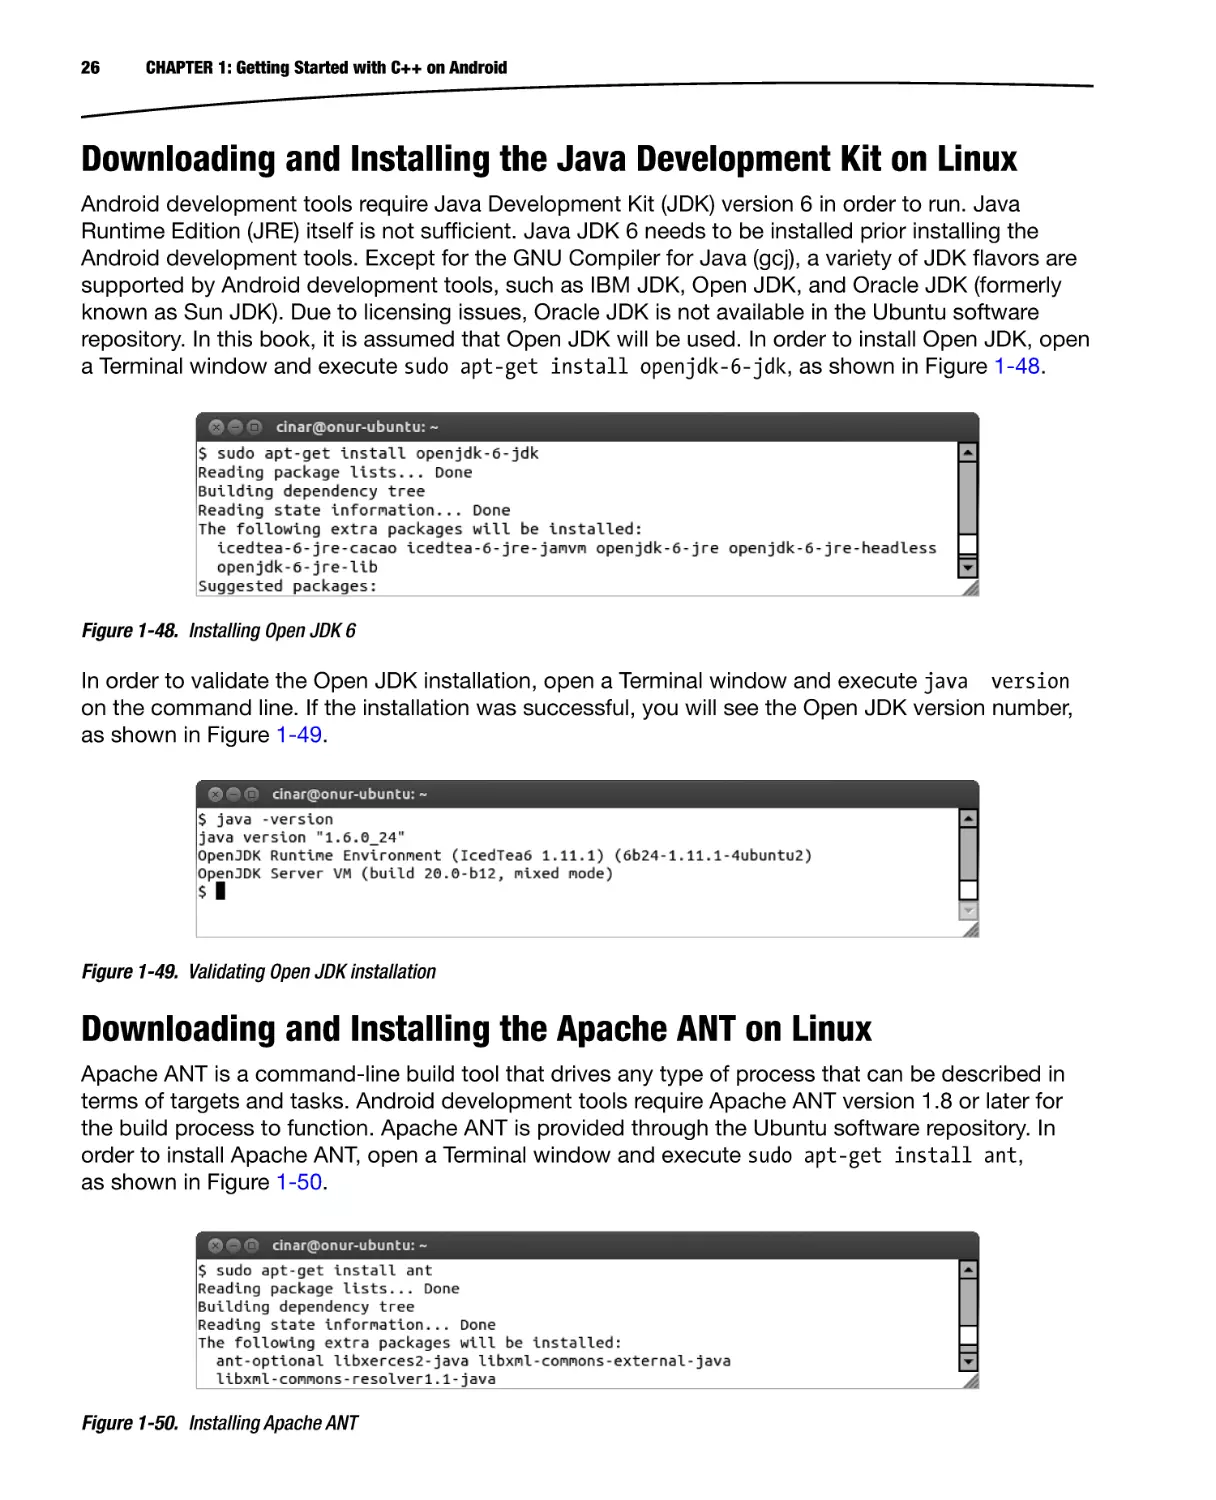 Downloading and Installing the Java Development Kit on Linux
Downloading and Installing the Apache ANT on Linux